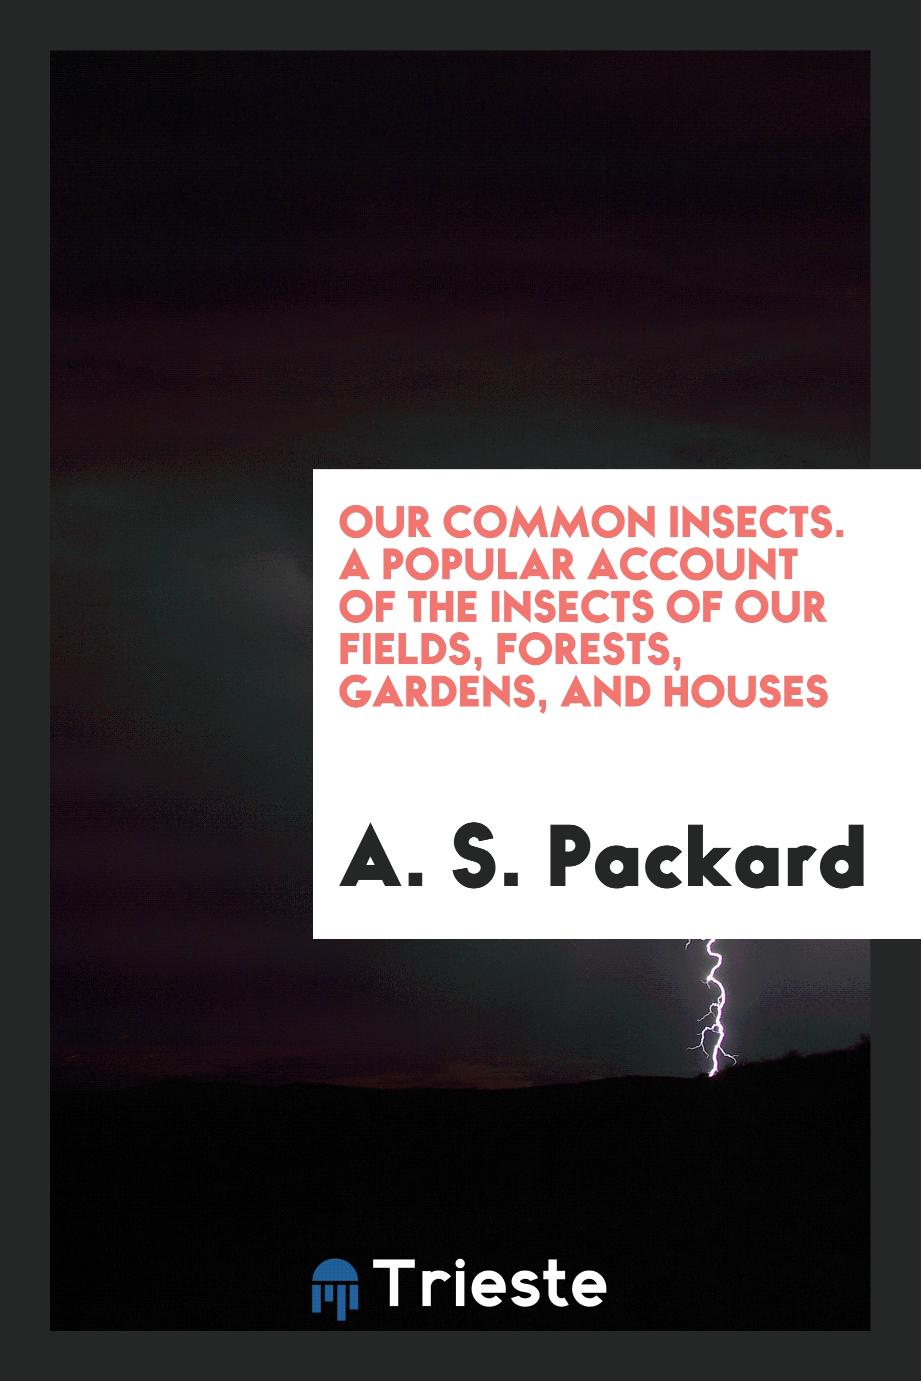 Our common insects. A popular account of the insects of our fields, forests, gardens, and houses